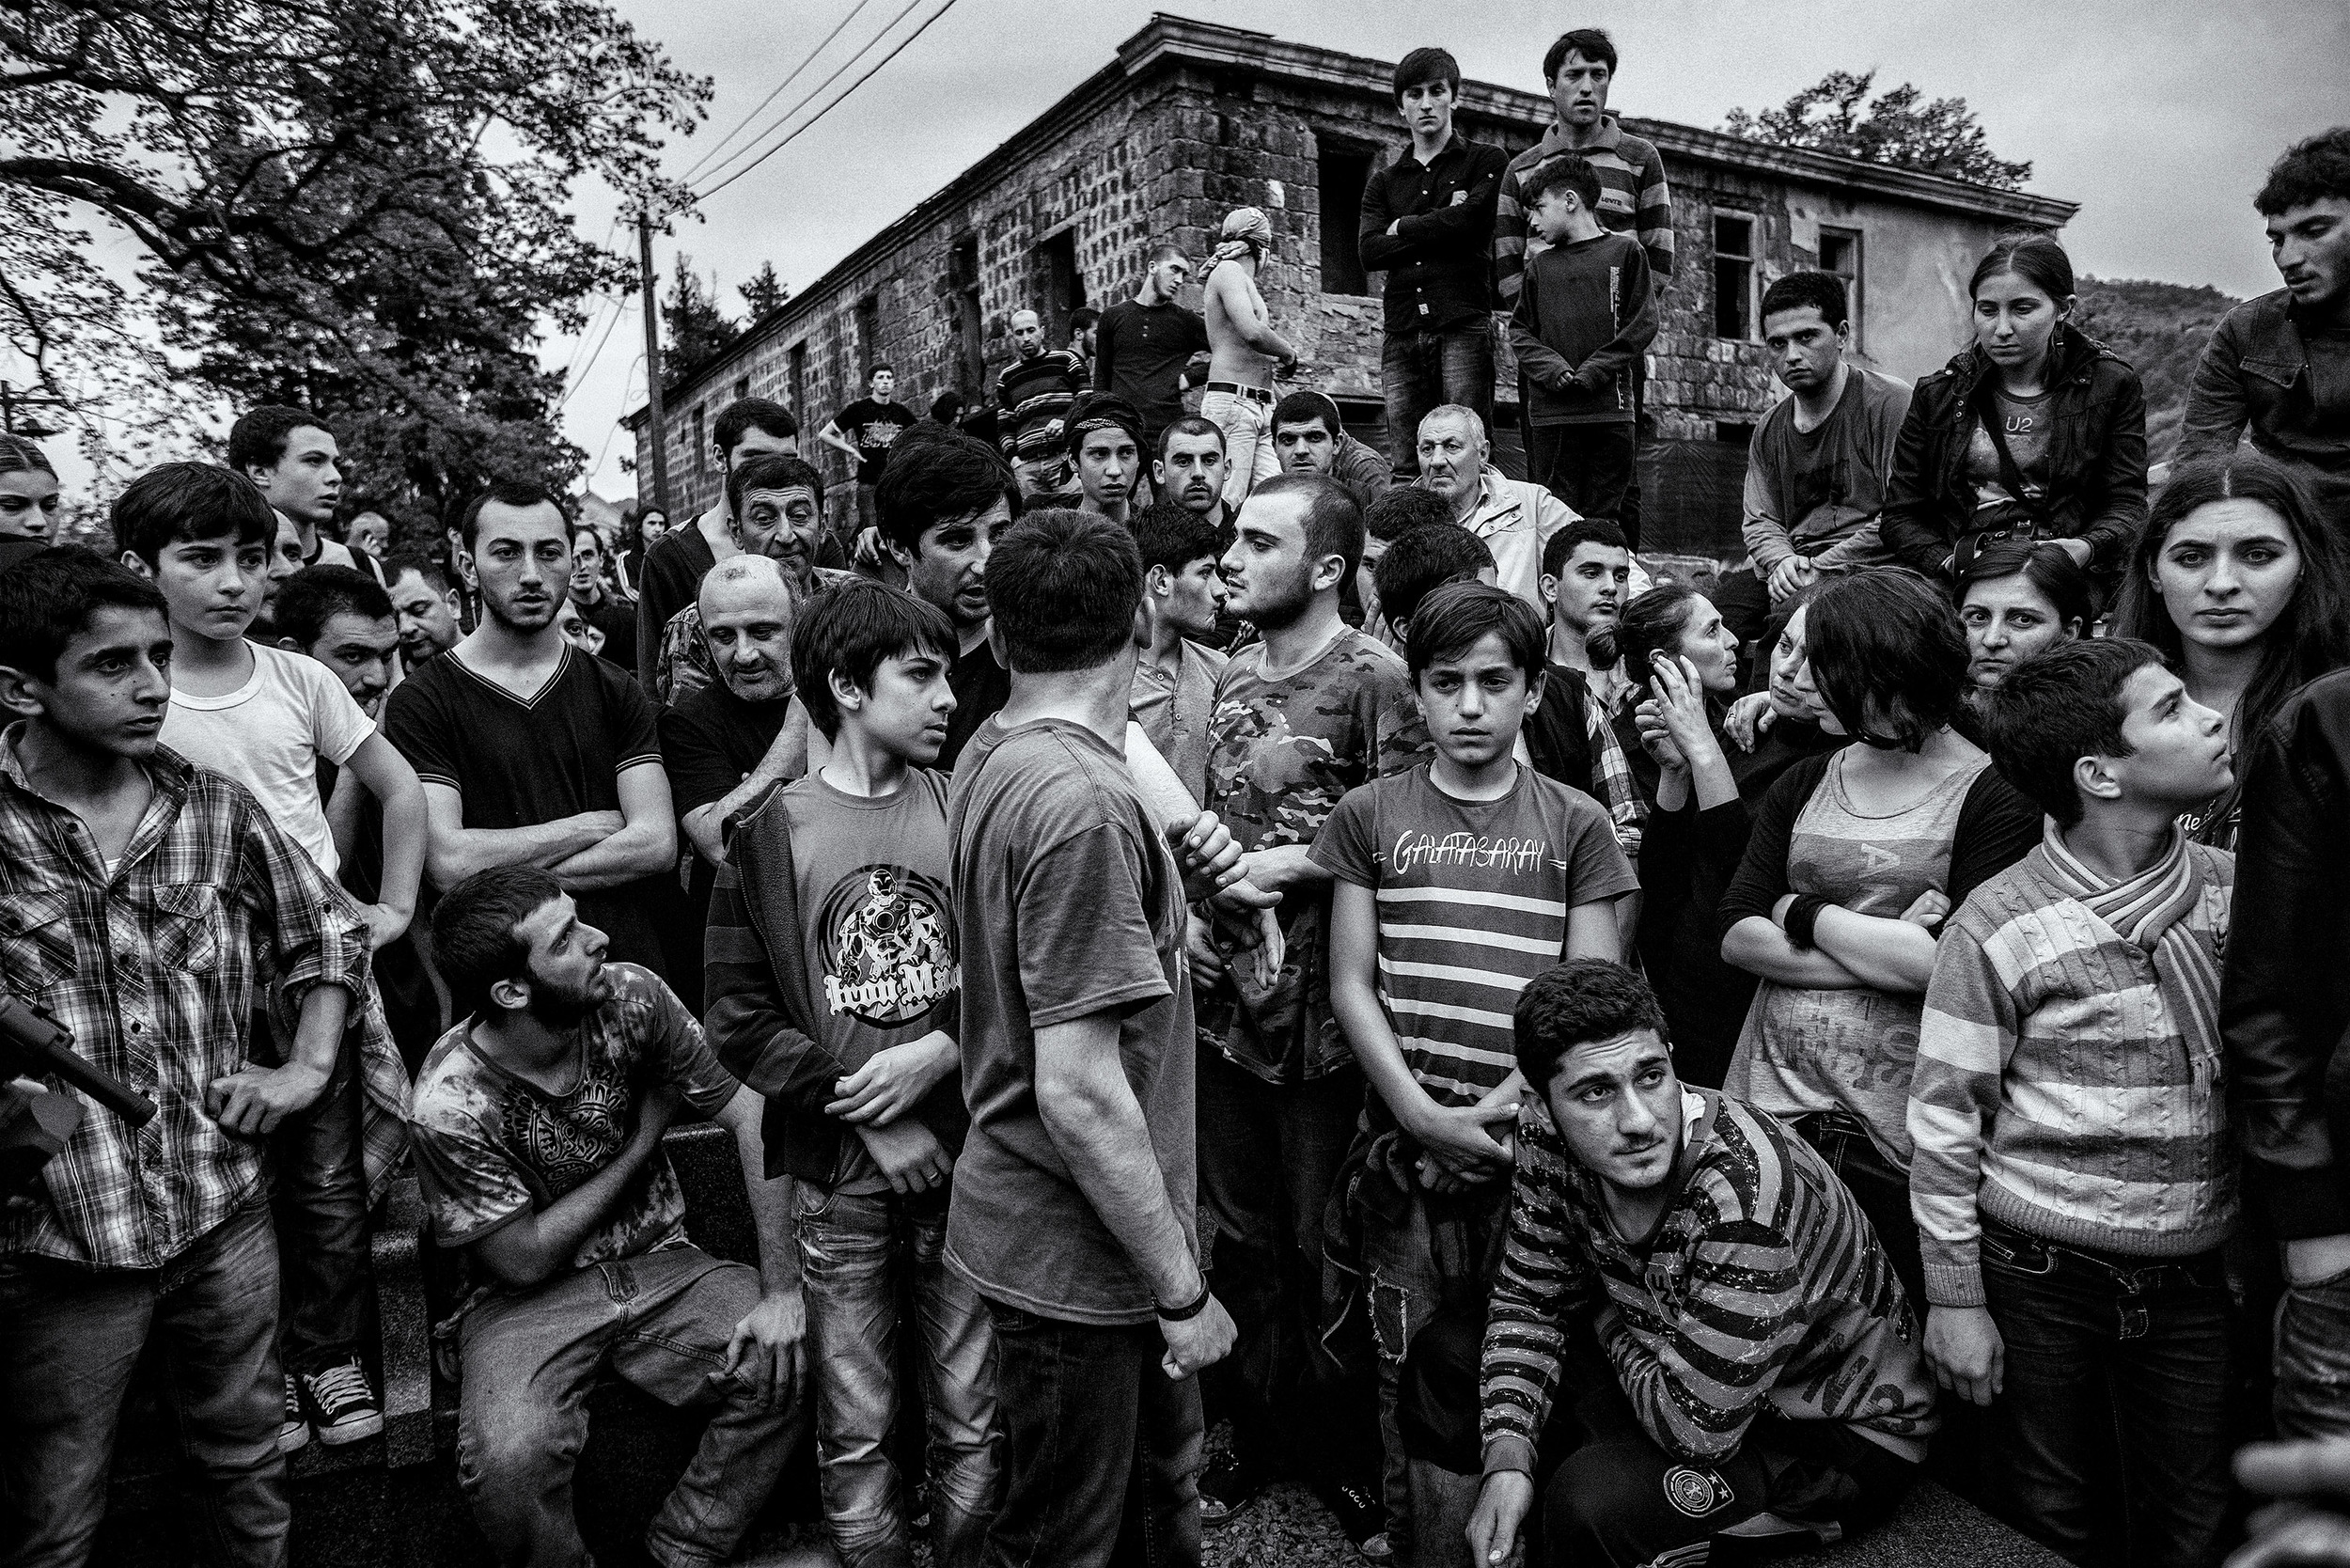  The most important aspect of the Lelo Burti game is to participate. Seen as a way to celebrate Easter, this game and its brutality are seen as a way to separate men and children. Shukhuti, Georgia, April 2014. 